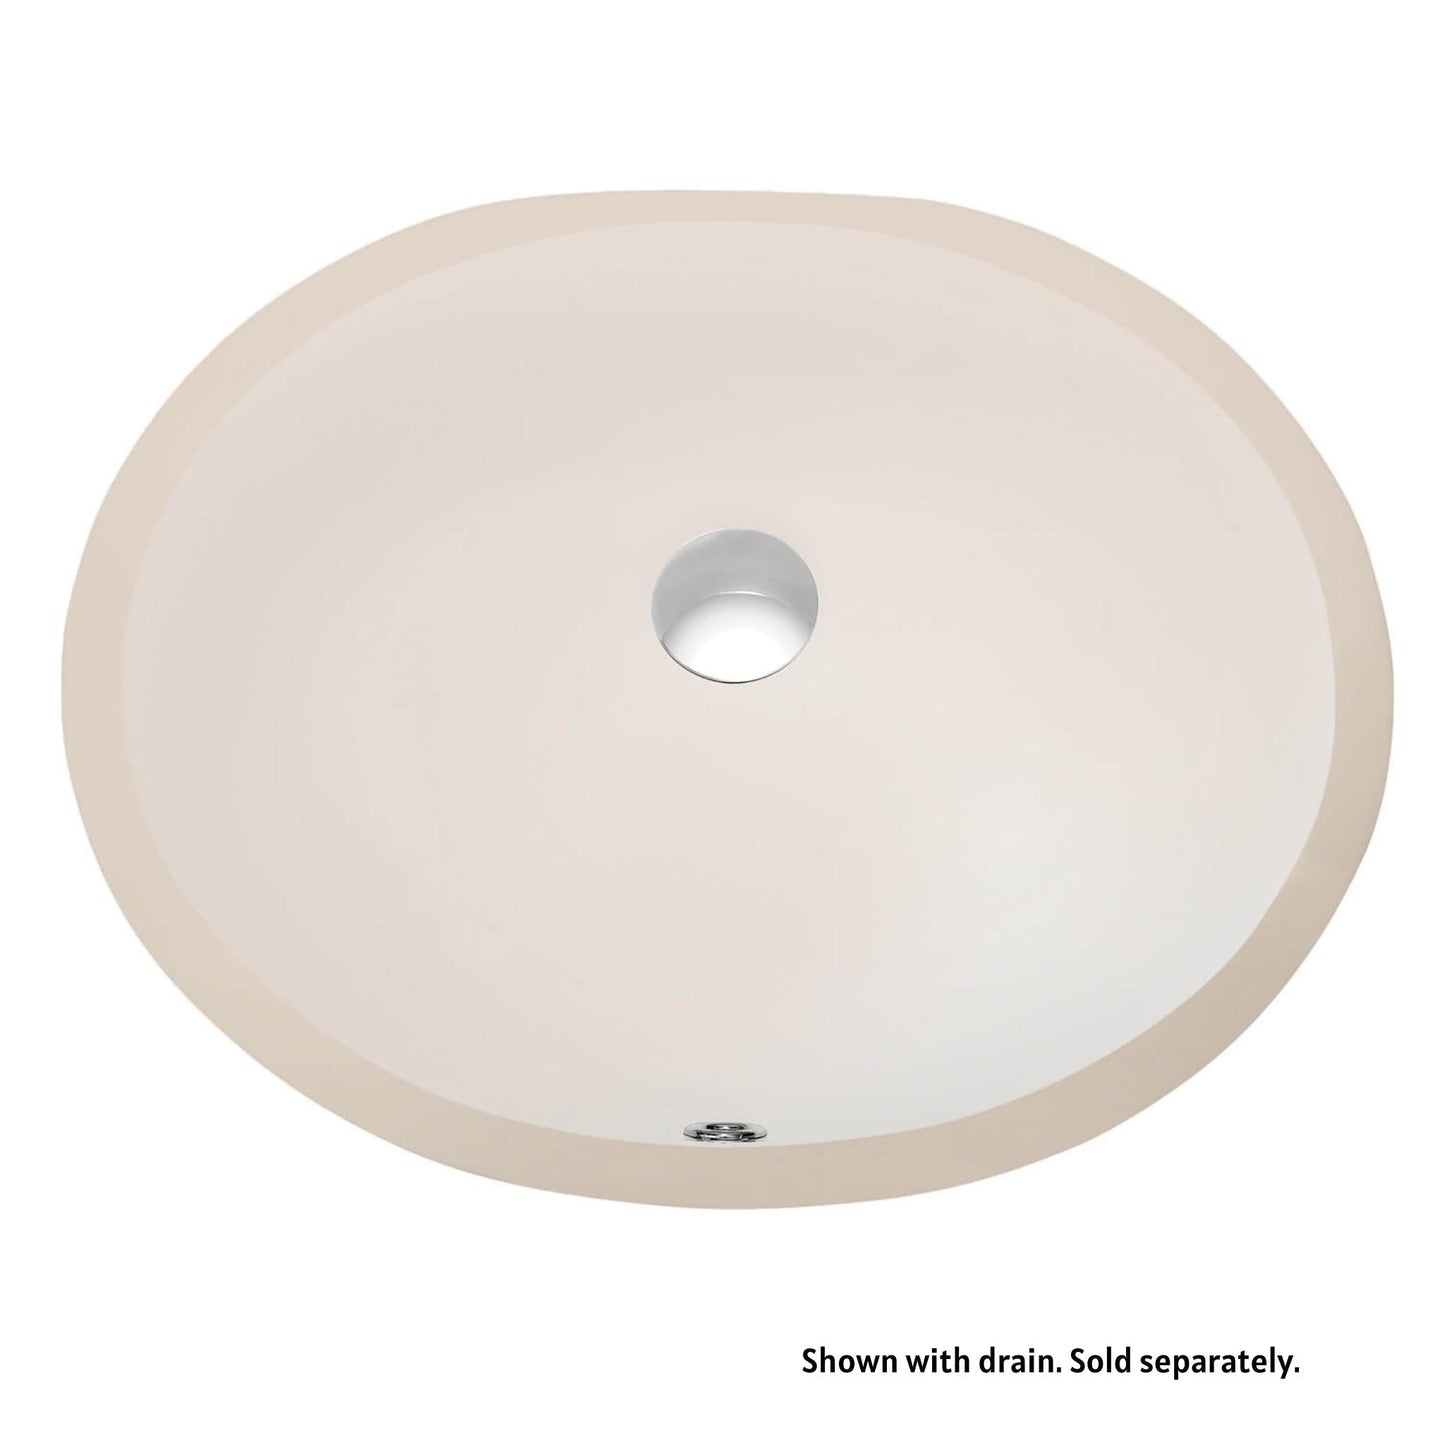 Blossom 19" x 16" Biscuit Oval Ceramic Undermount Sink With Overflow